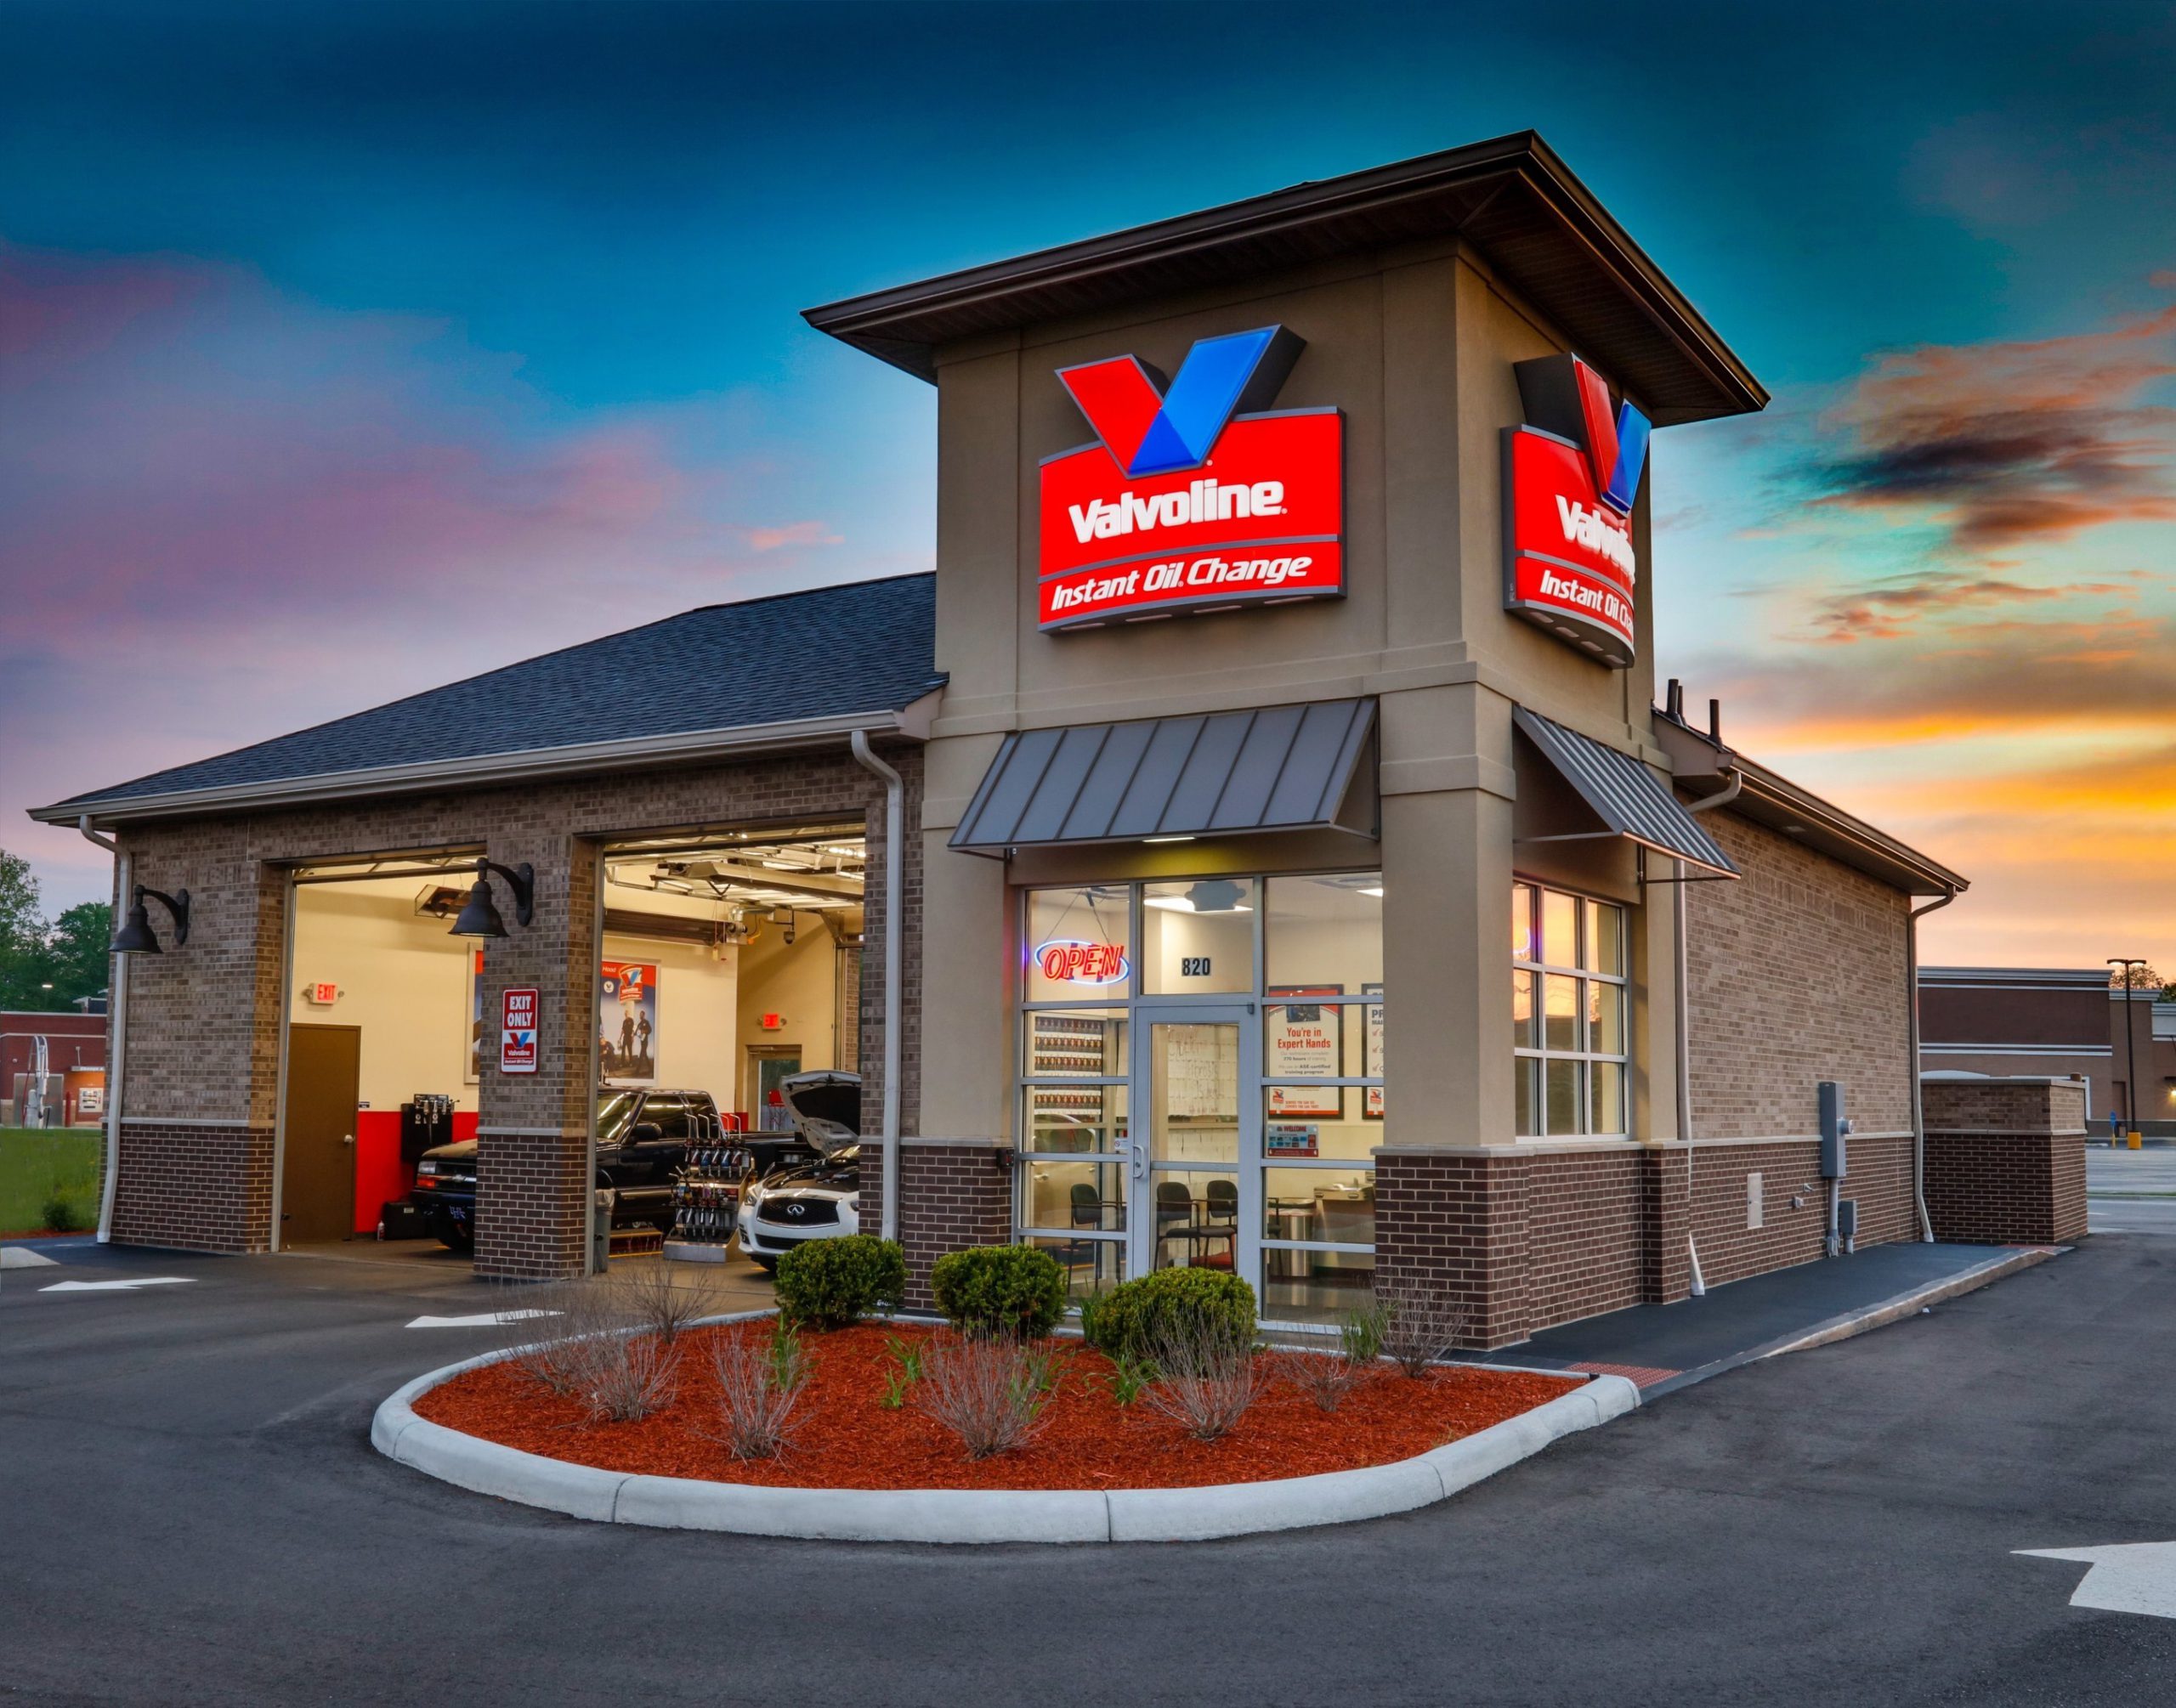 Does Valvoline Hire People with Criminal Records?